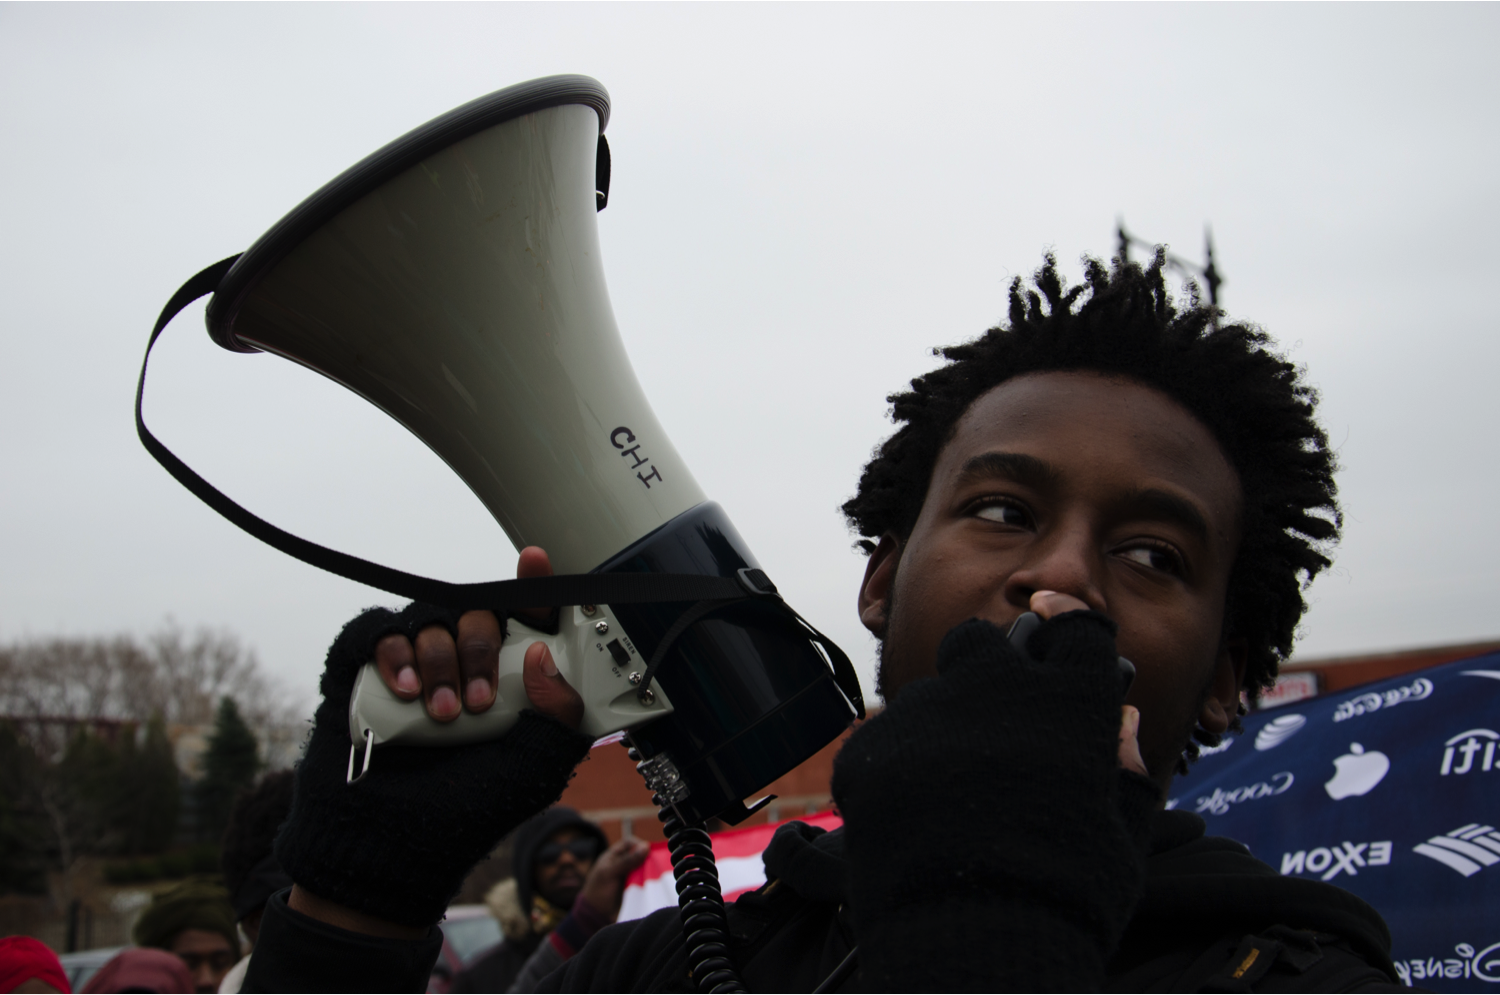 Malcolm London, of Black Youth Project 100, encourages protesters to keep fighting for the freedom of black community in front of Wal-Mart in West Side. “It’s out duty to fight,” he said. “It’s our duty to win.” (Jin Wu/Medill)